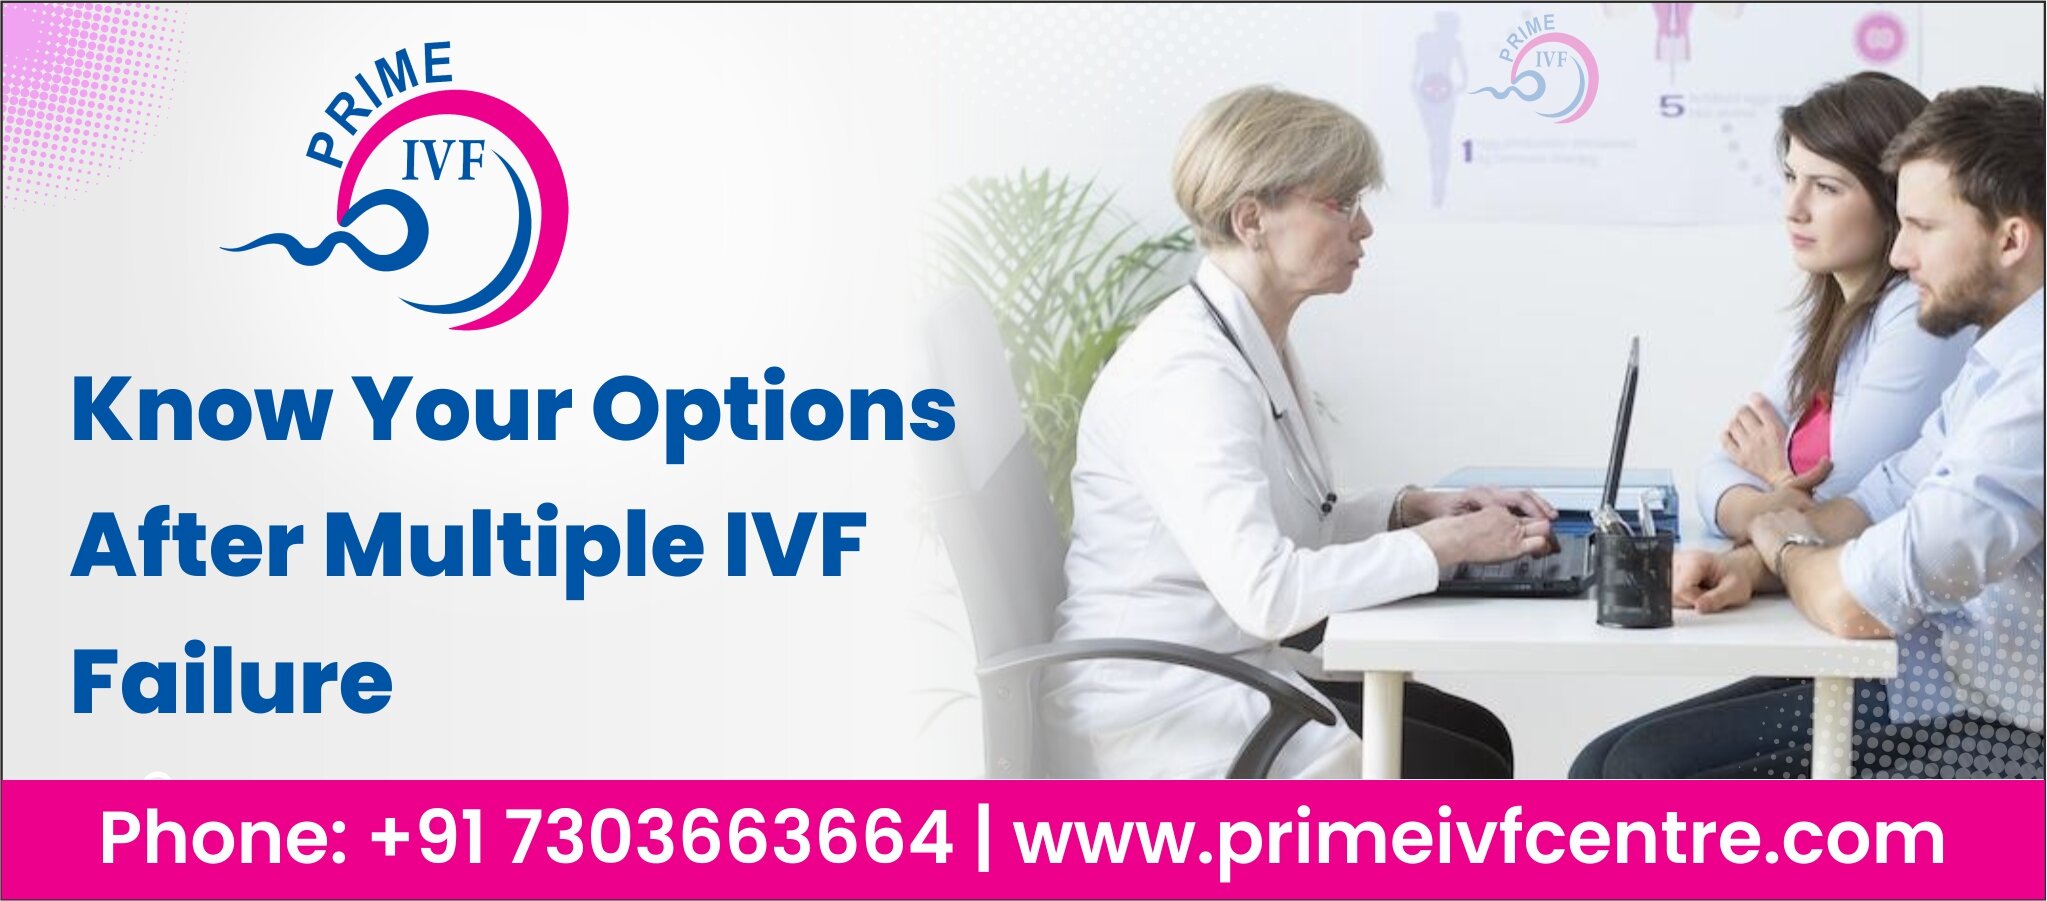 Know Your Options After Multiple IVF Failure